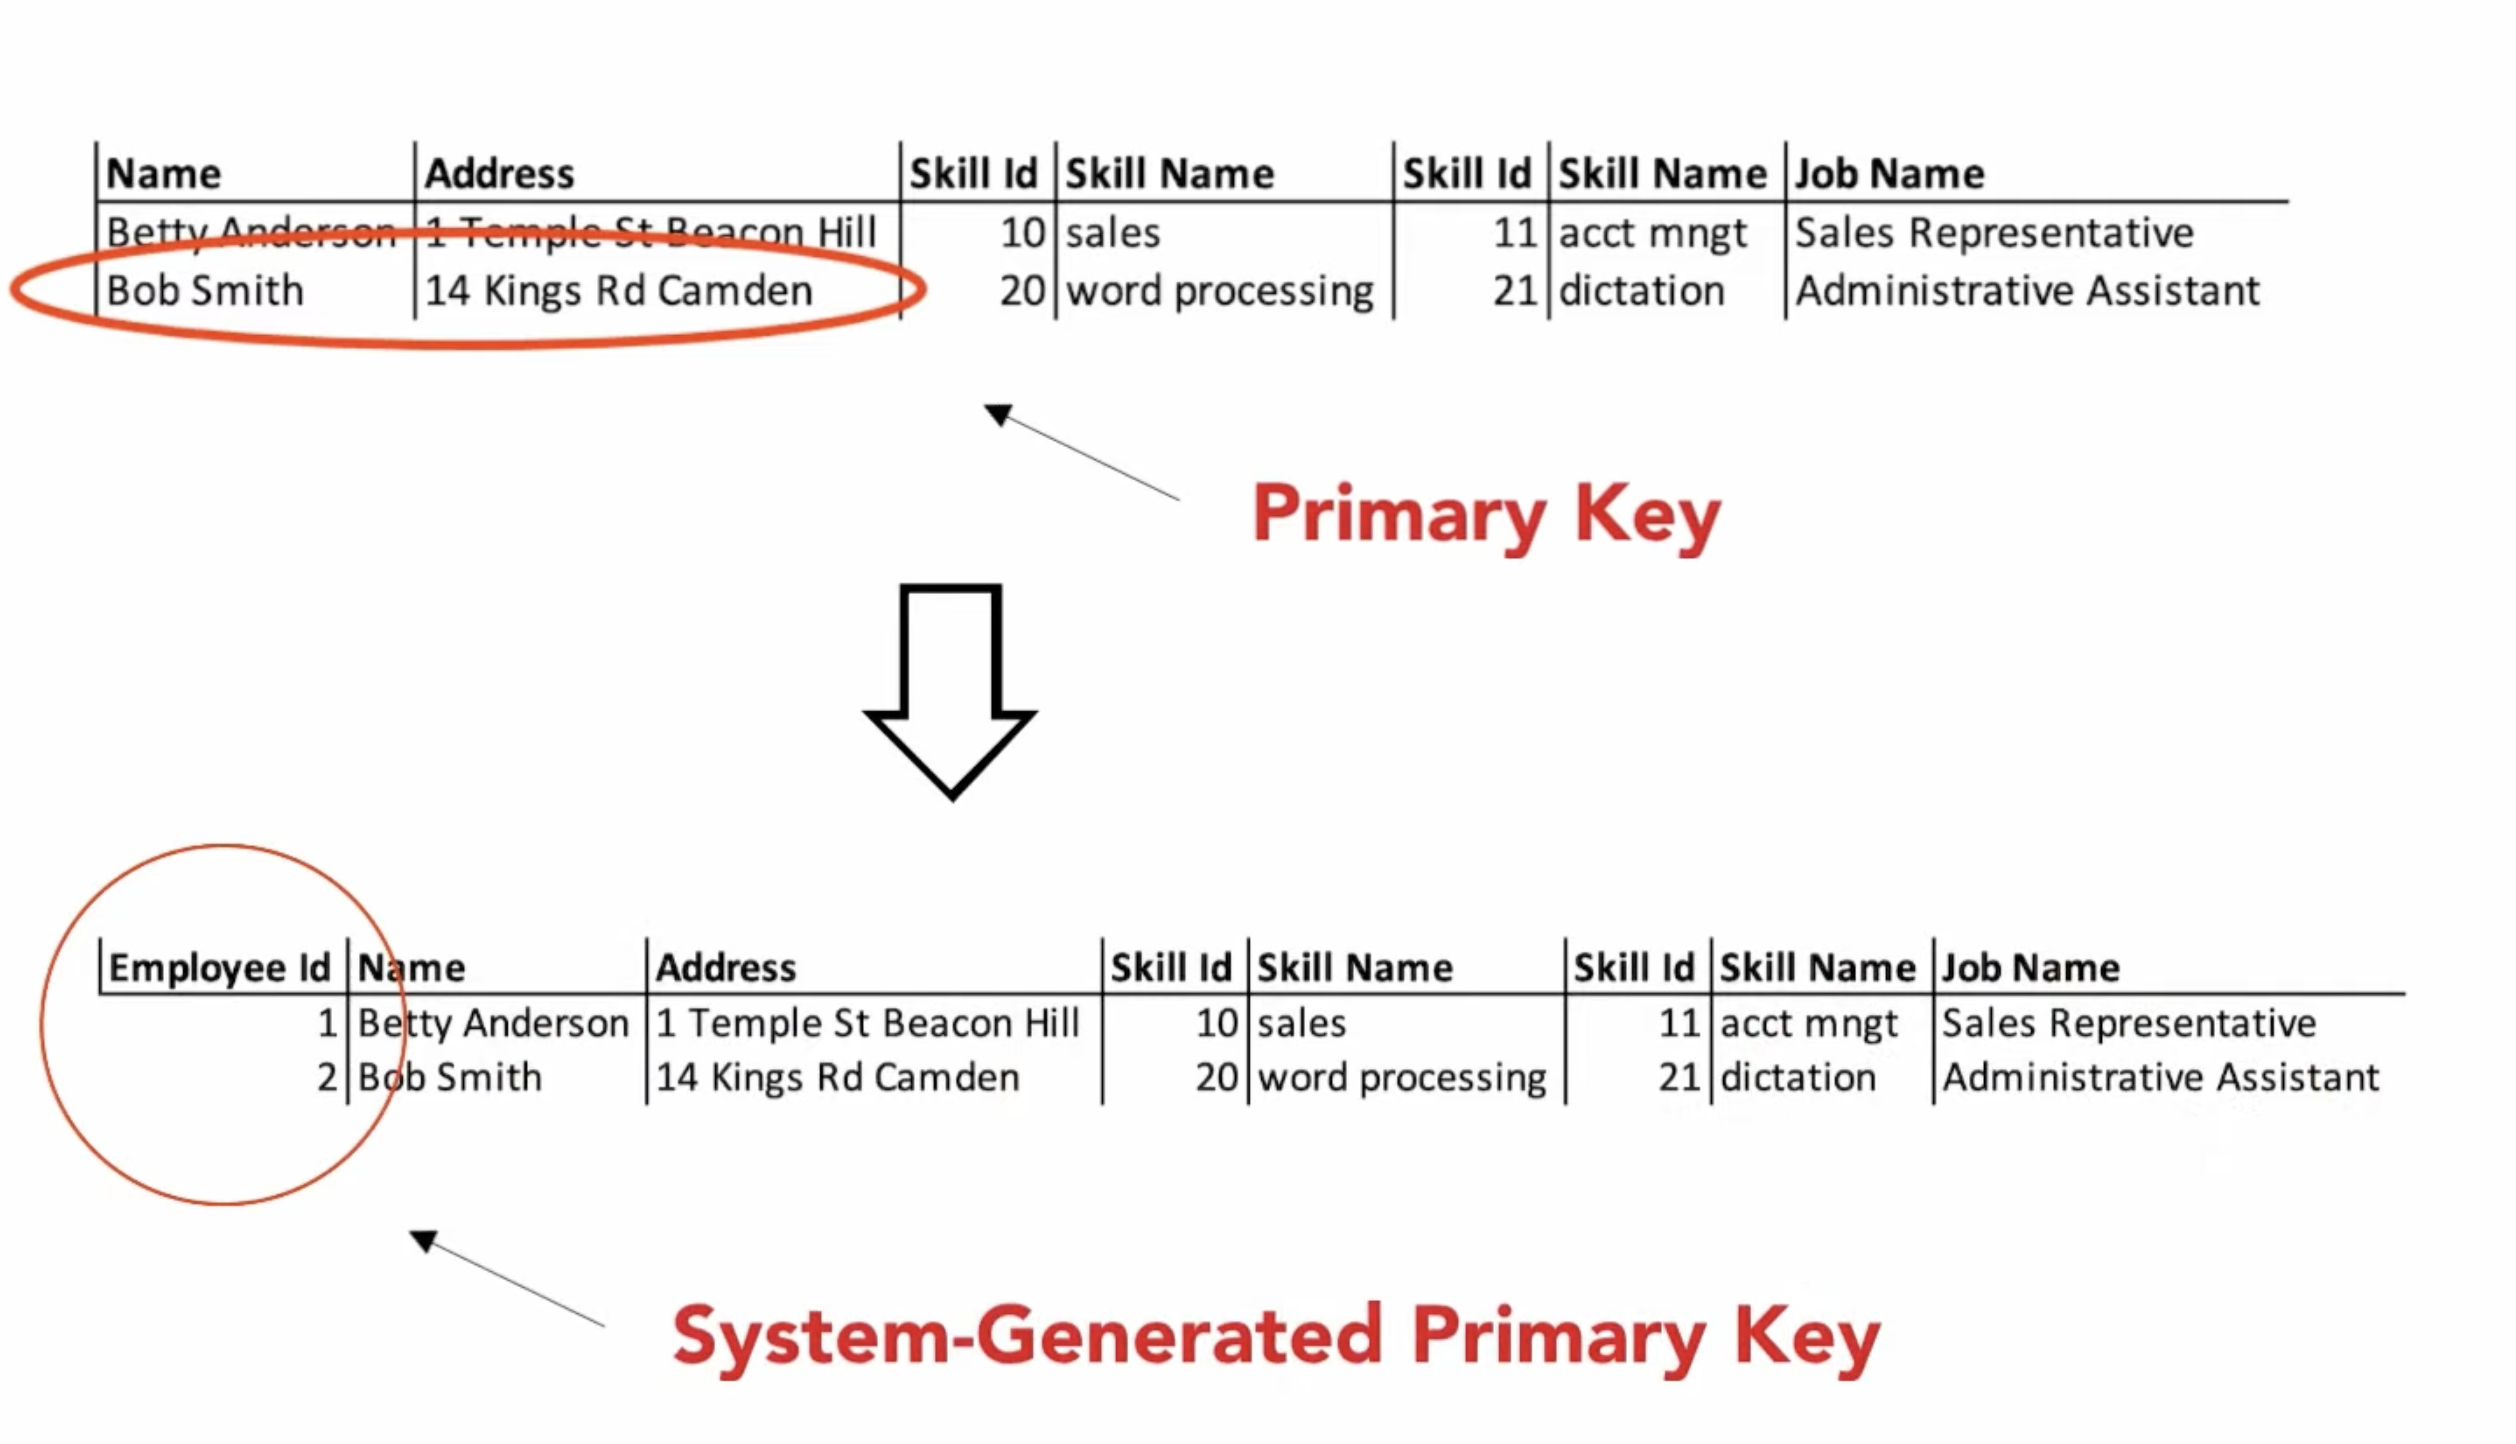 ../../_images/normalform-1st-primarykey.png